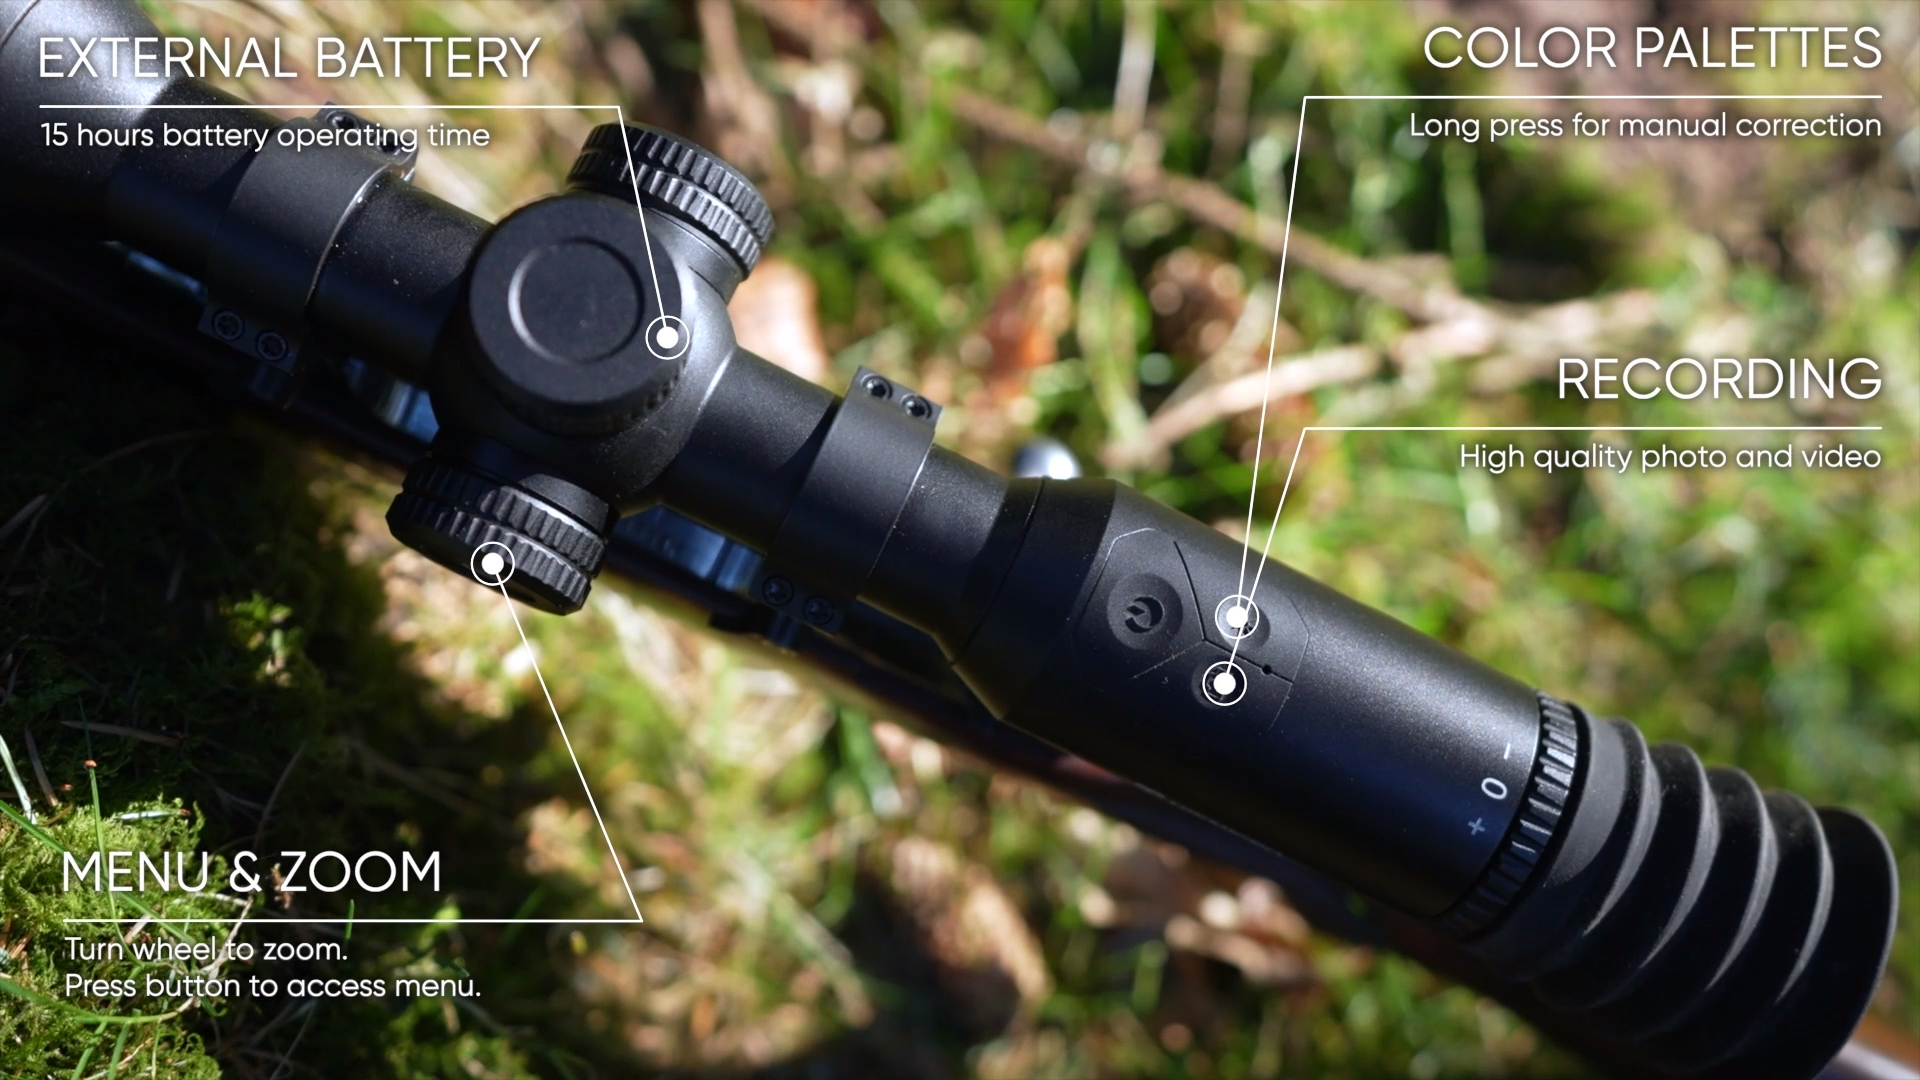 Hikmicro Stellar SH35 & SH50 Thermal Riflescope highlighting the external battery, colour palettes, menu & zoom, 
             and the recording wheels or knobs from a close angle.